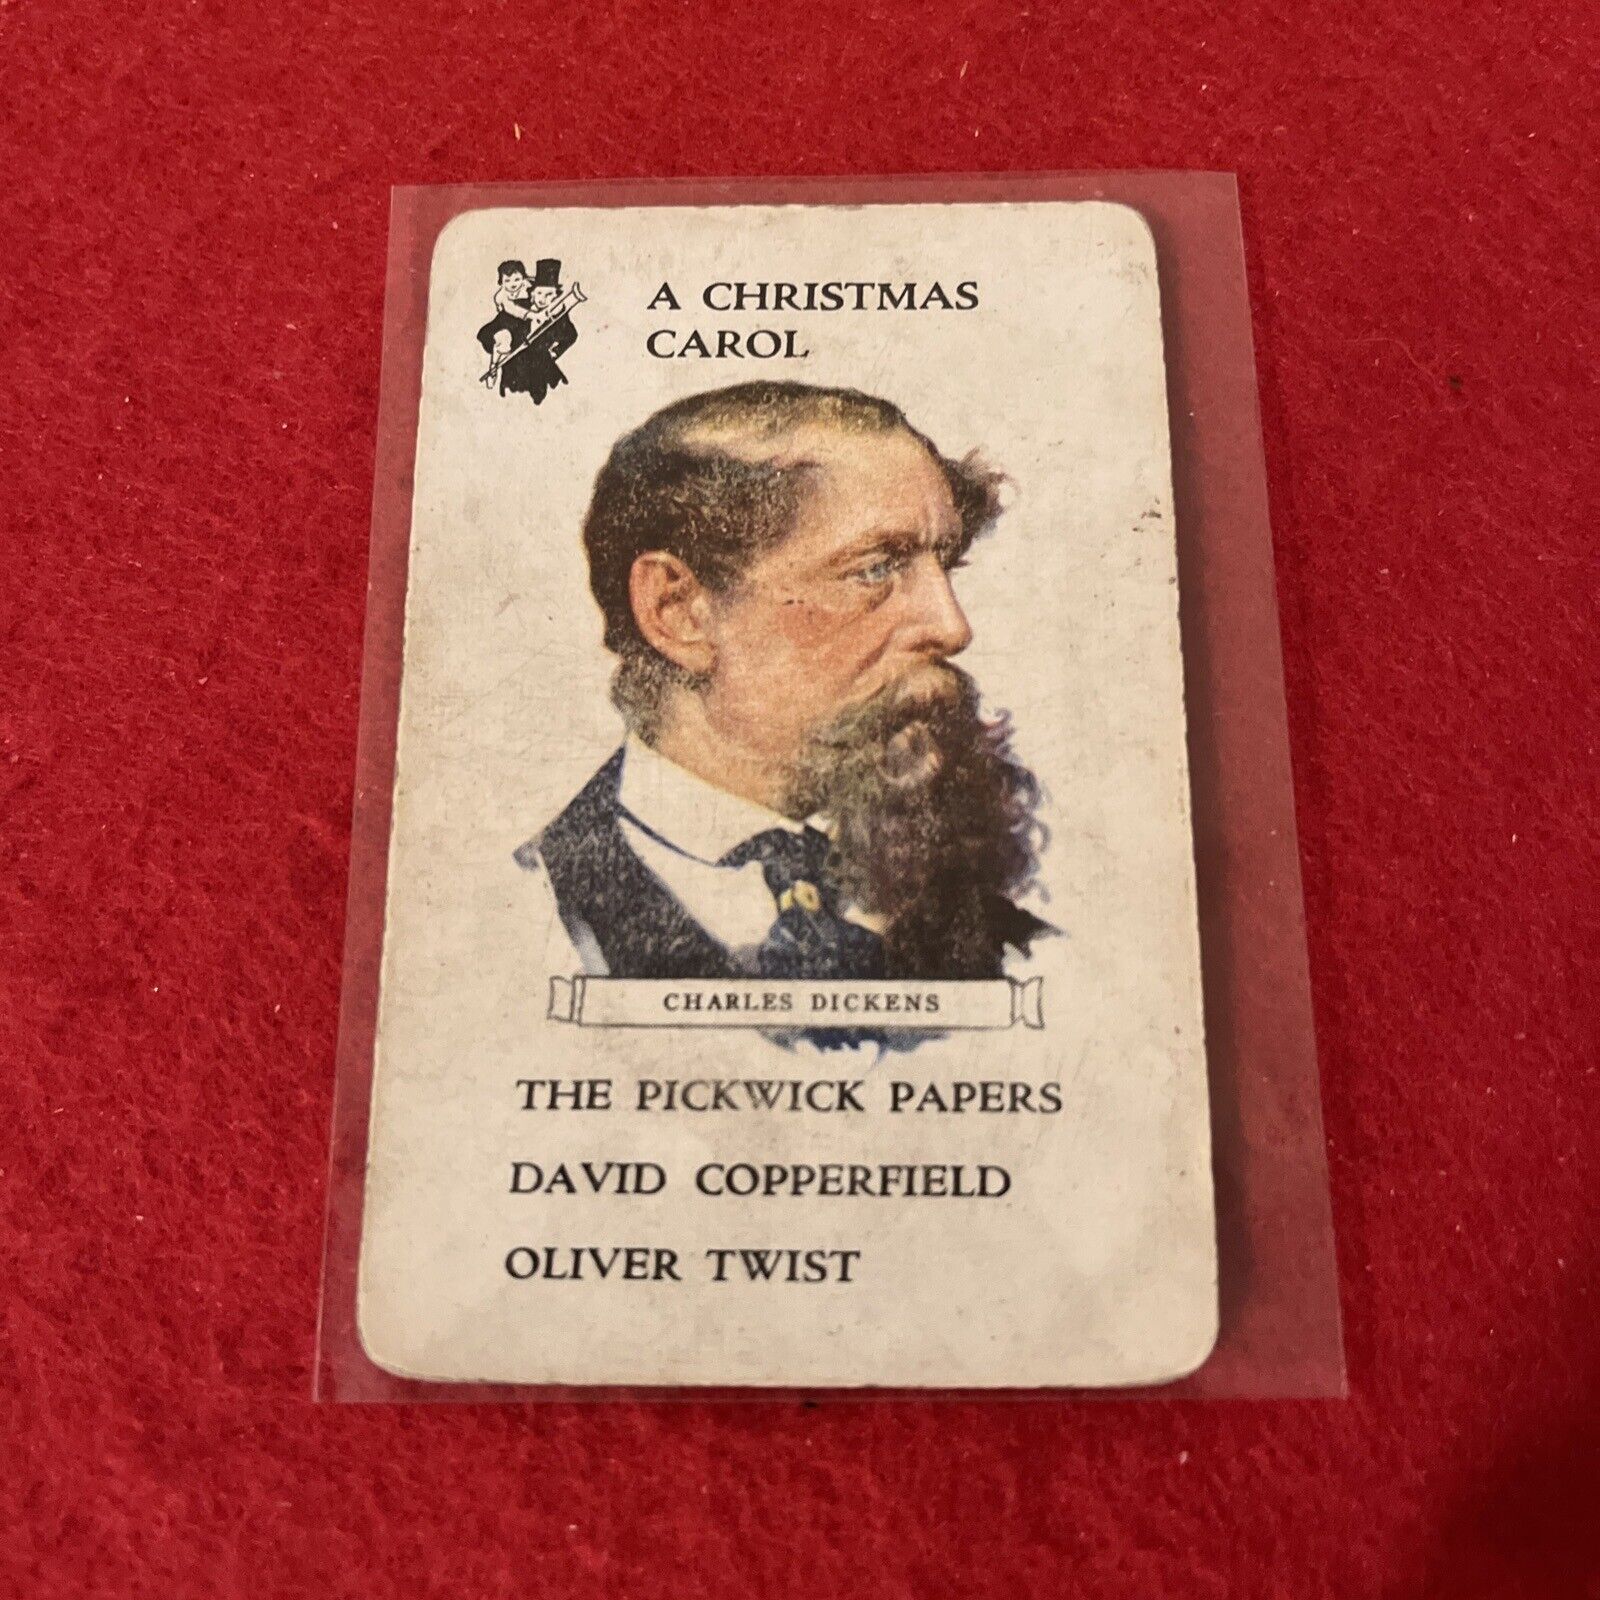 Late 1800s Early 1900s Era CHARLES DICKENS Card, No #. Card F-G